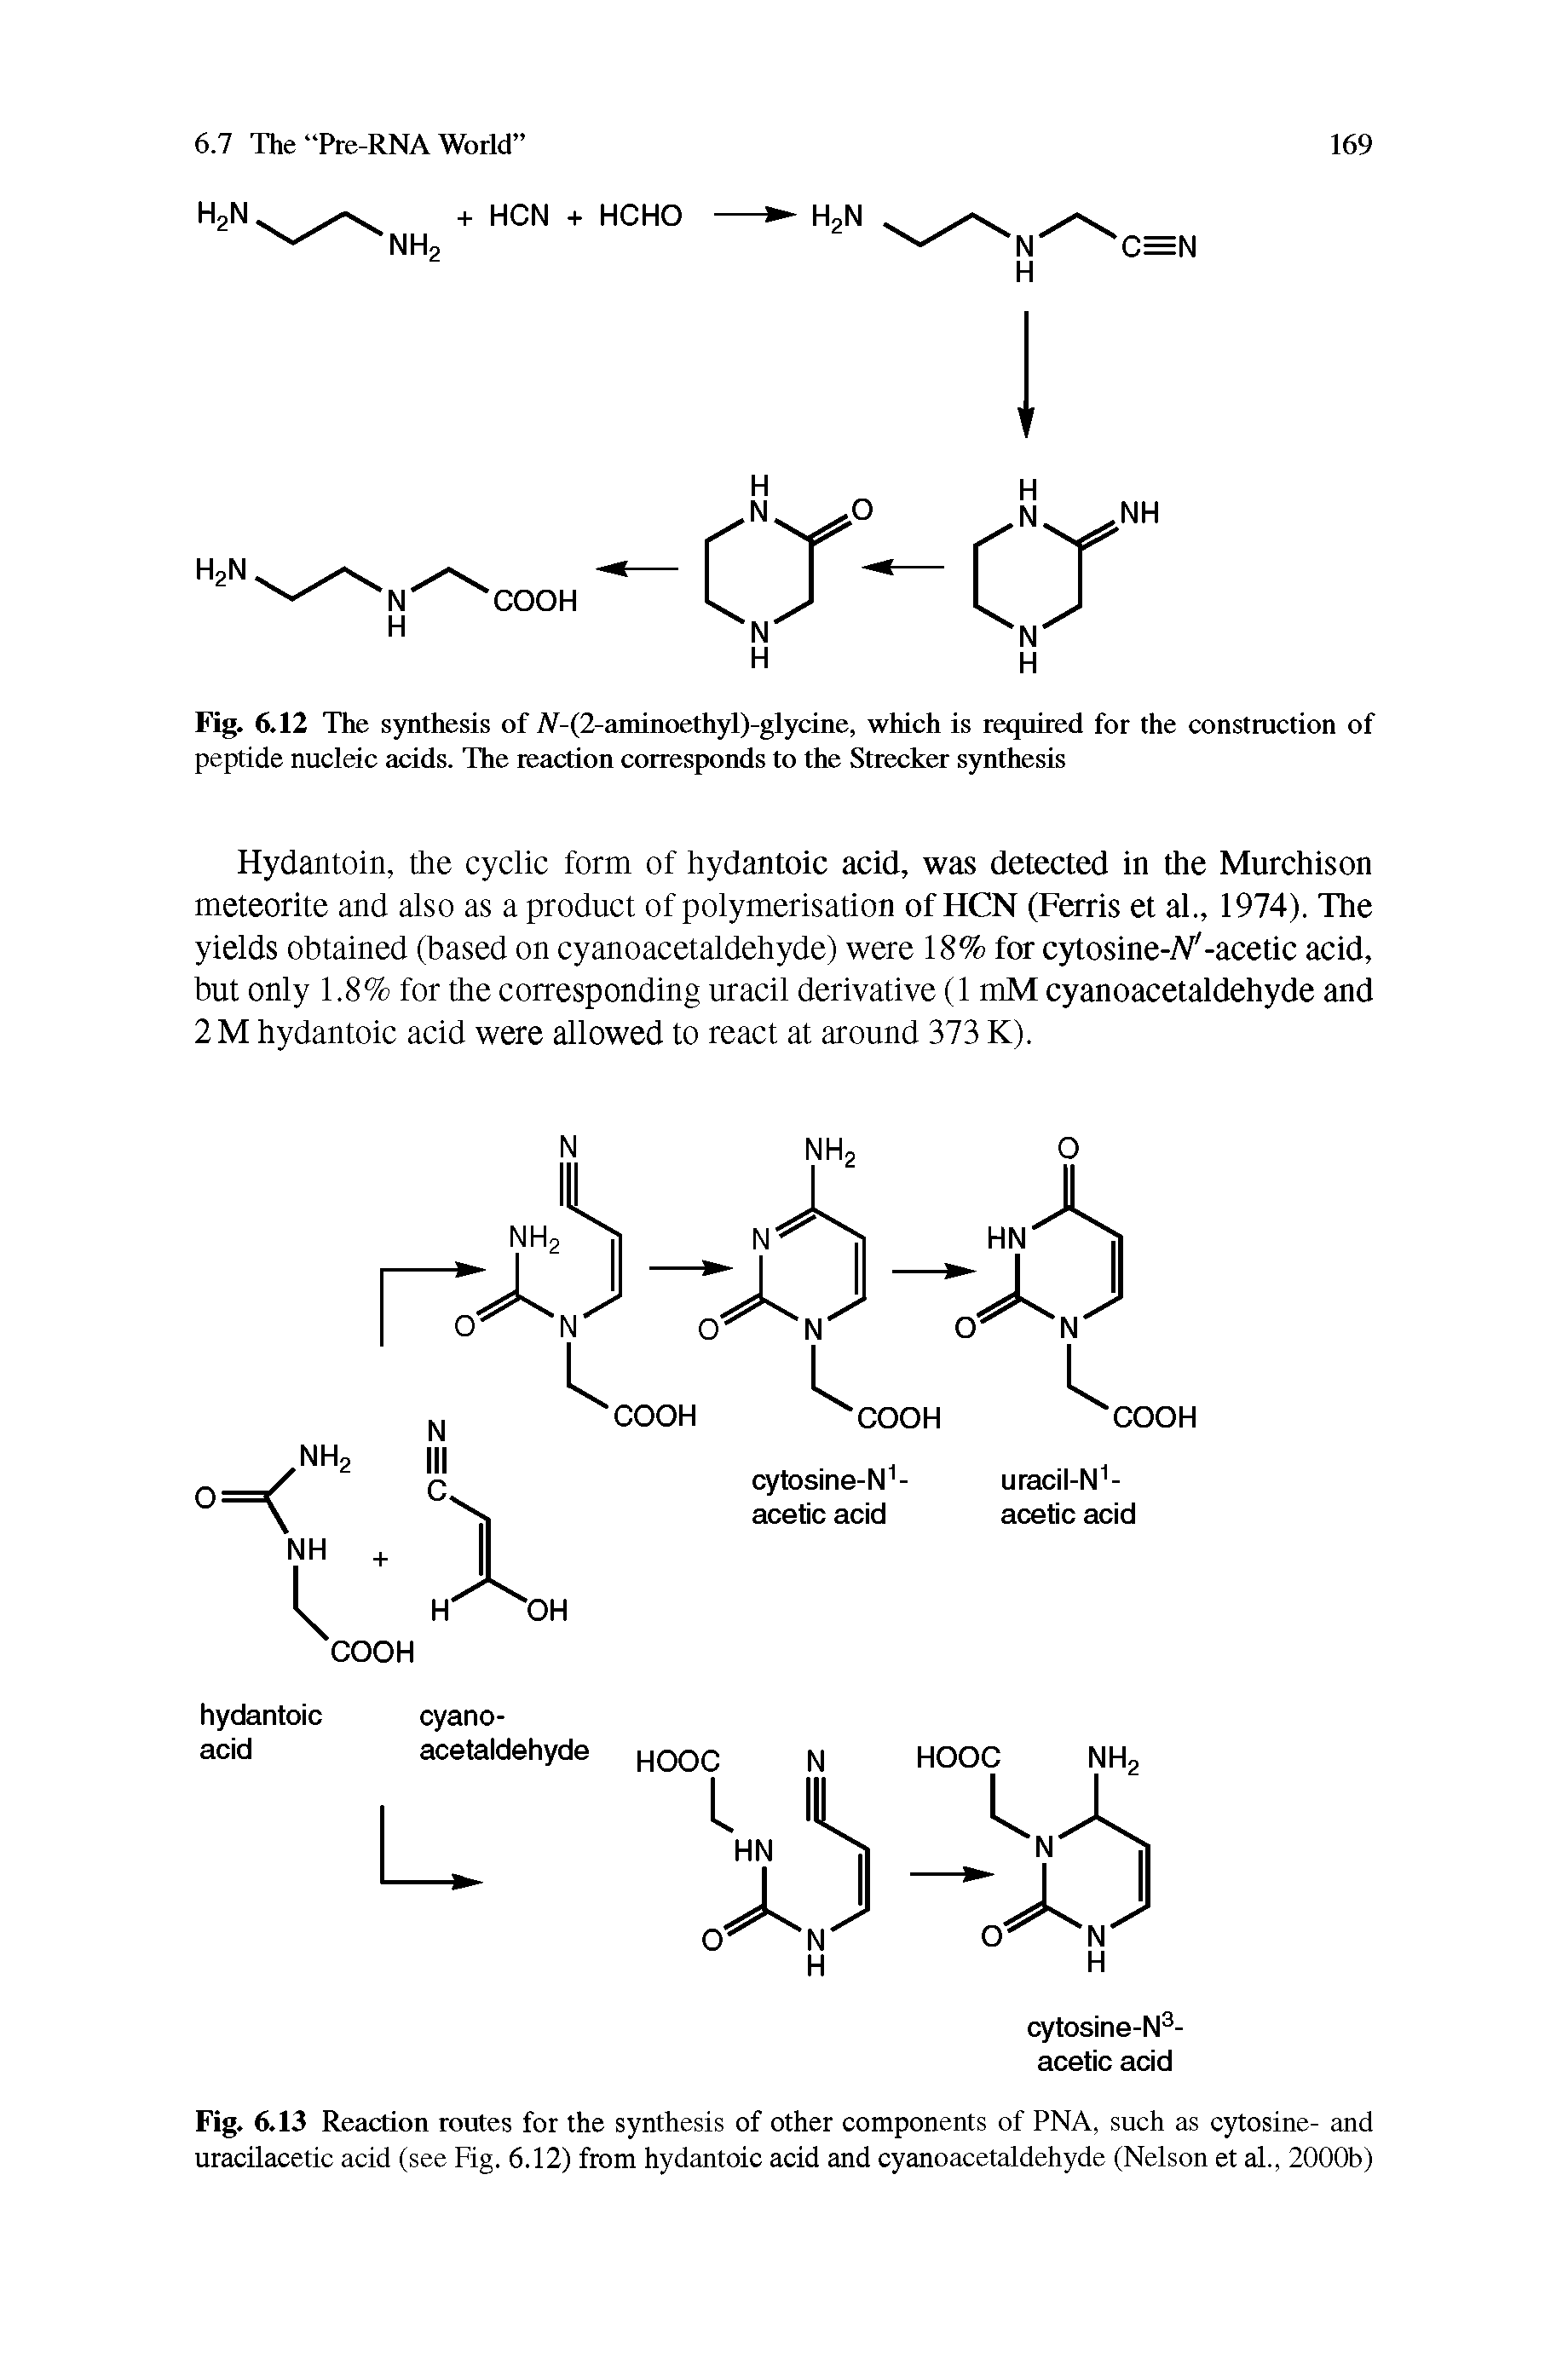 Fig. 6.13 Reaction routes for the synthesis of other components of PNA, such as cytosine- and uracilacetic acid (see Fig. 6.12) from hydantoic acid and cyanoacetaldehyde (Nelson et al., 2000b)...